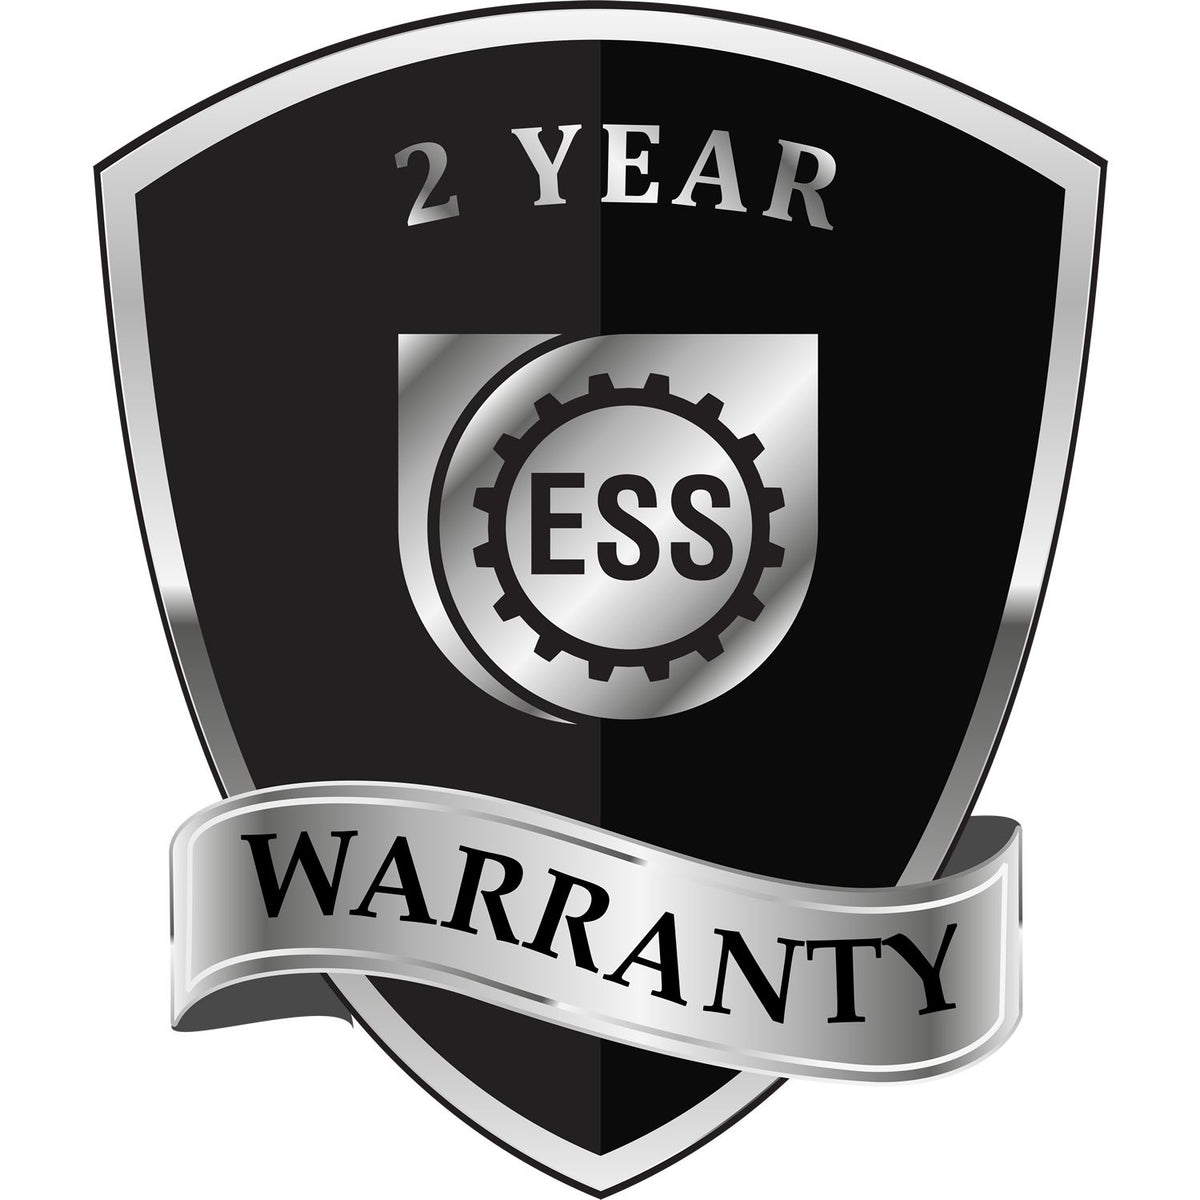 A black and silver badge or emblem showing warranty information for the Gift Indiana Engineer Seal